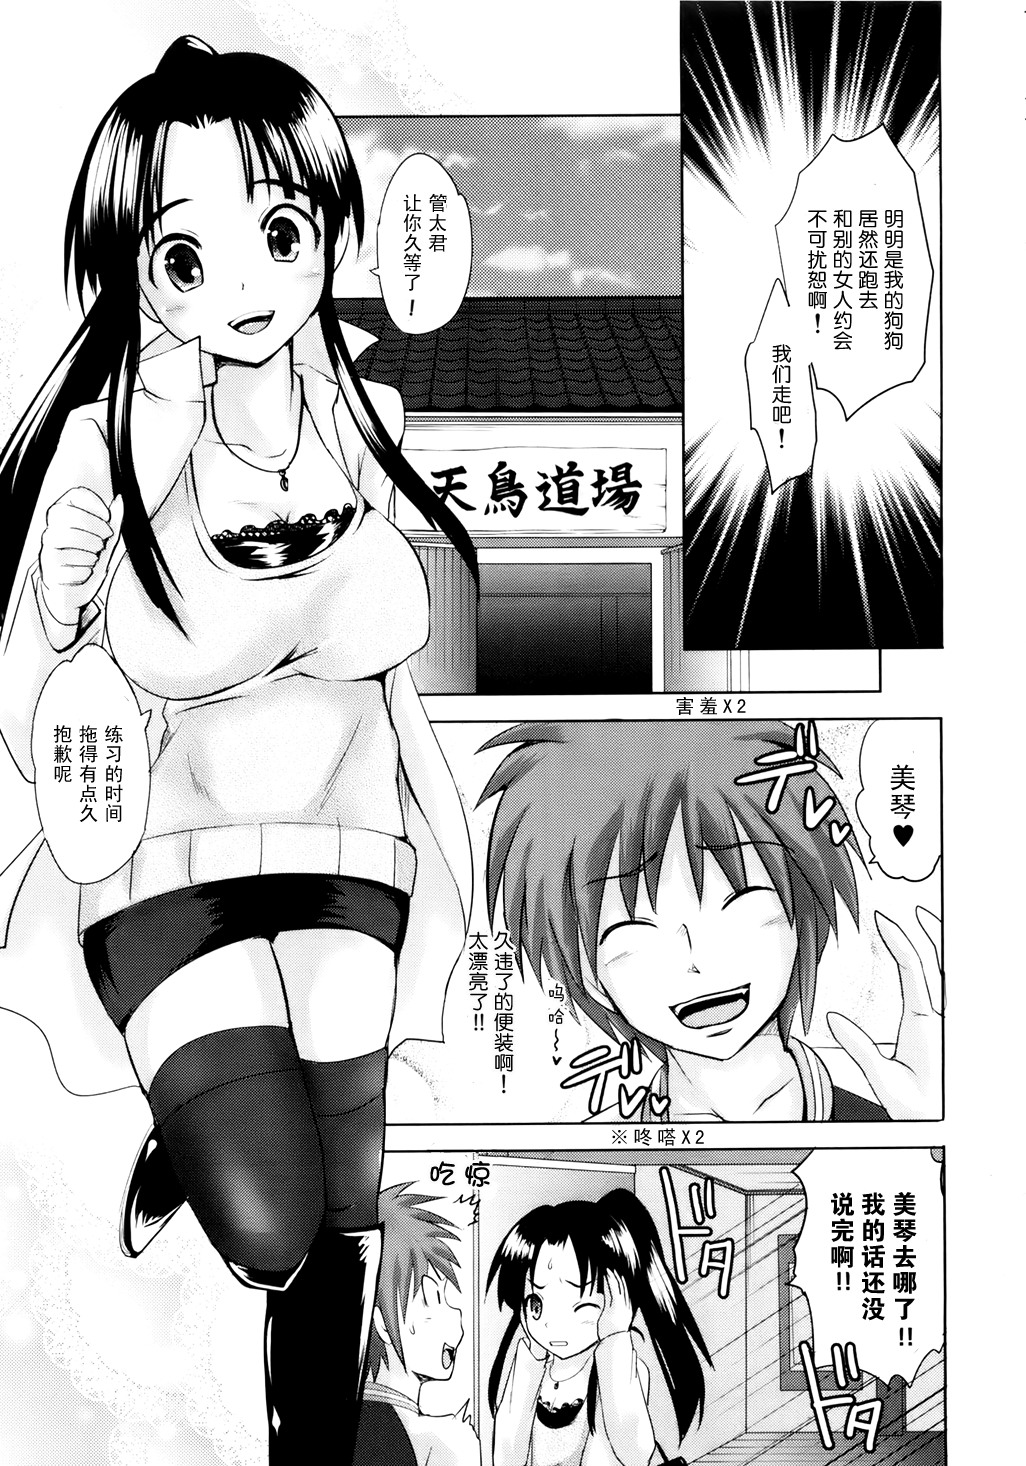 [Natsume Fumika] Sundere! Ch.8 [Chinese] [夏目文花] スンデレ! CH8 [中文翻譯]